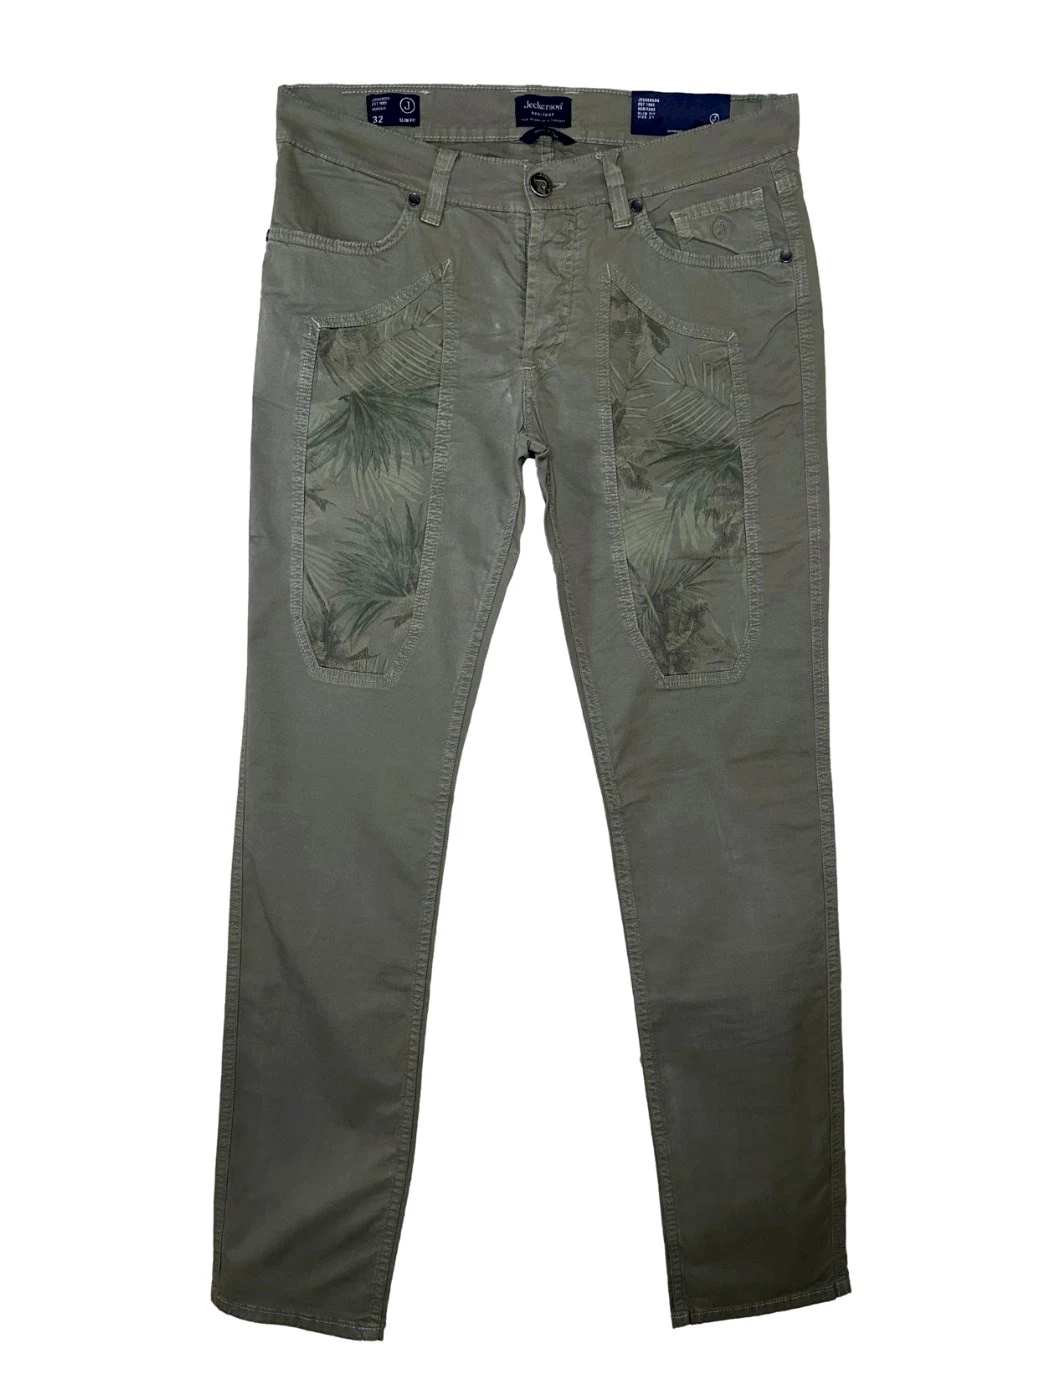 Trousers with patterned Jeckerson patch